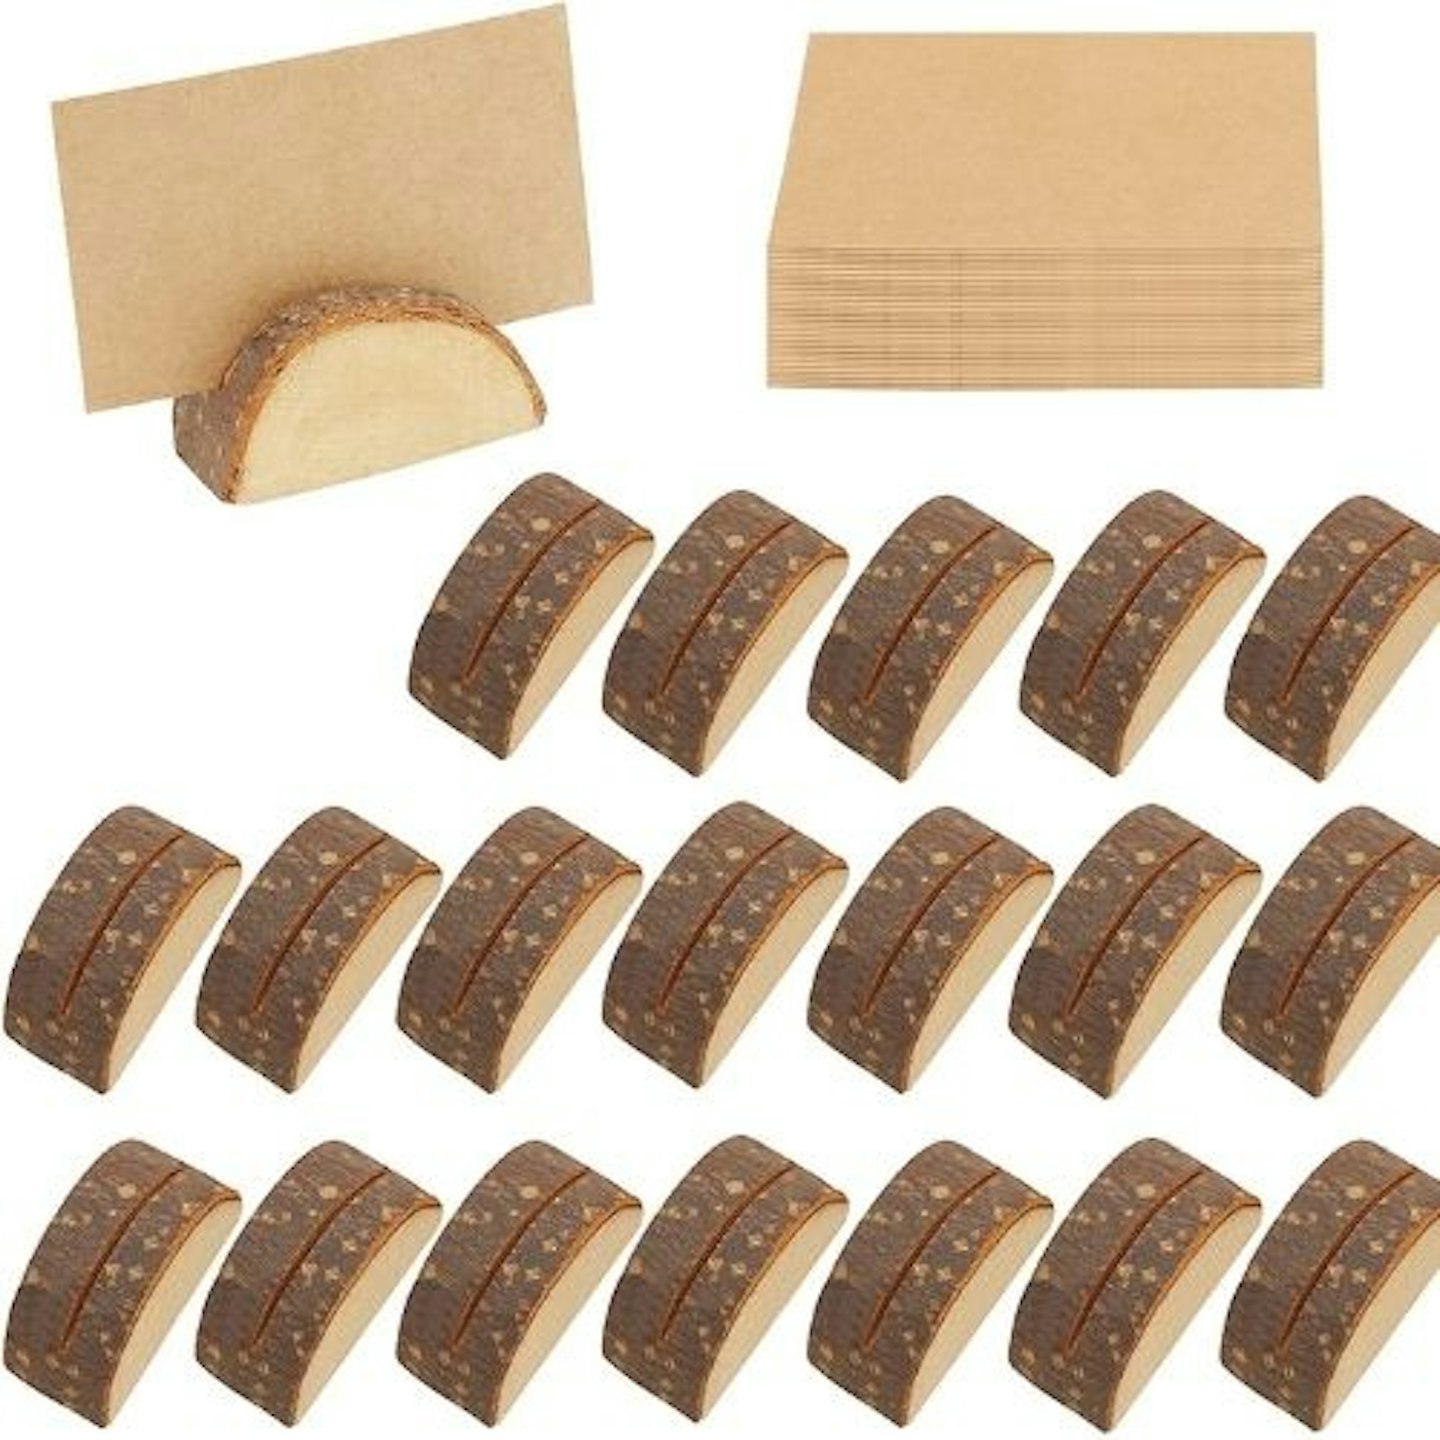 Belle Vous Semi-Circle Place Card Holders (20 Pack)